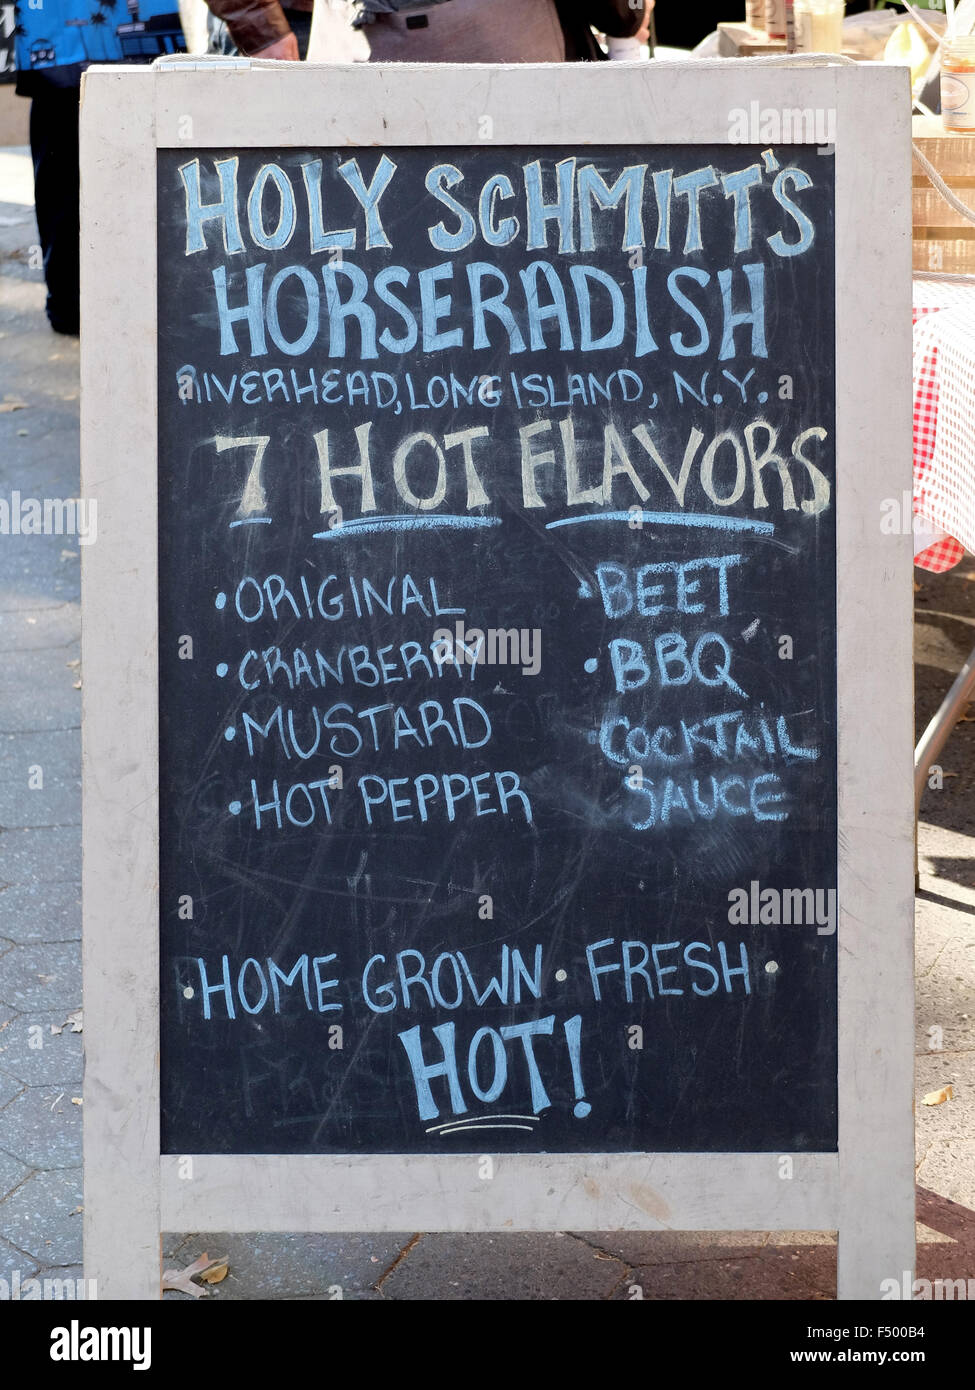 A sign advertising an unusual business at the Union Square green market in Manhattan, New York City Stock Photo